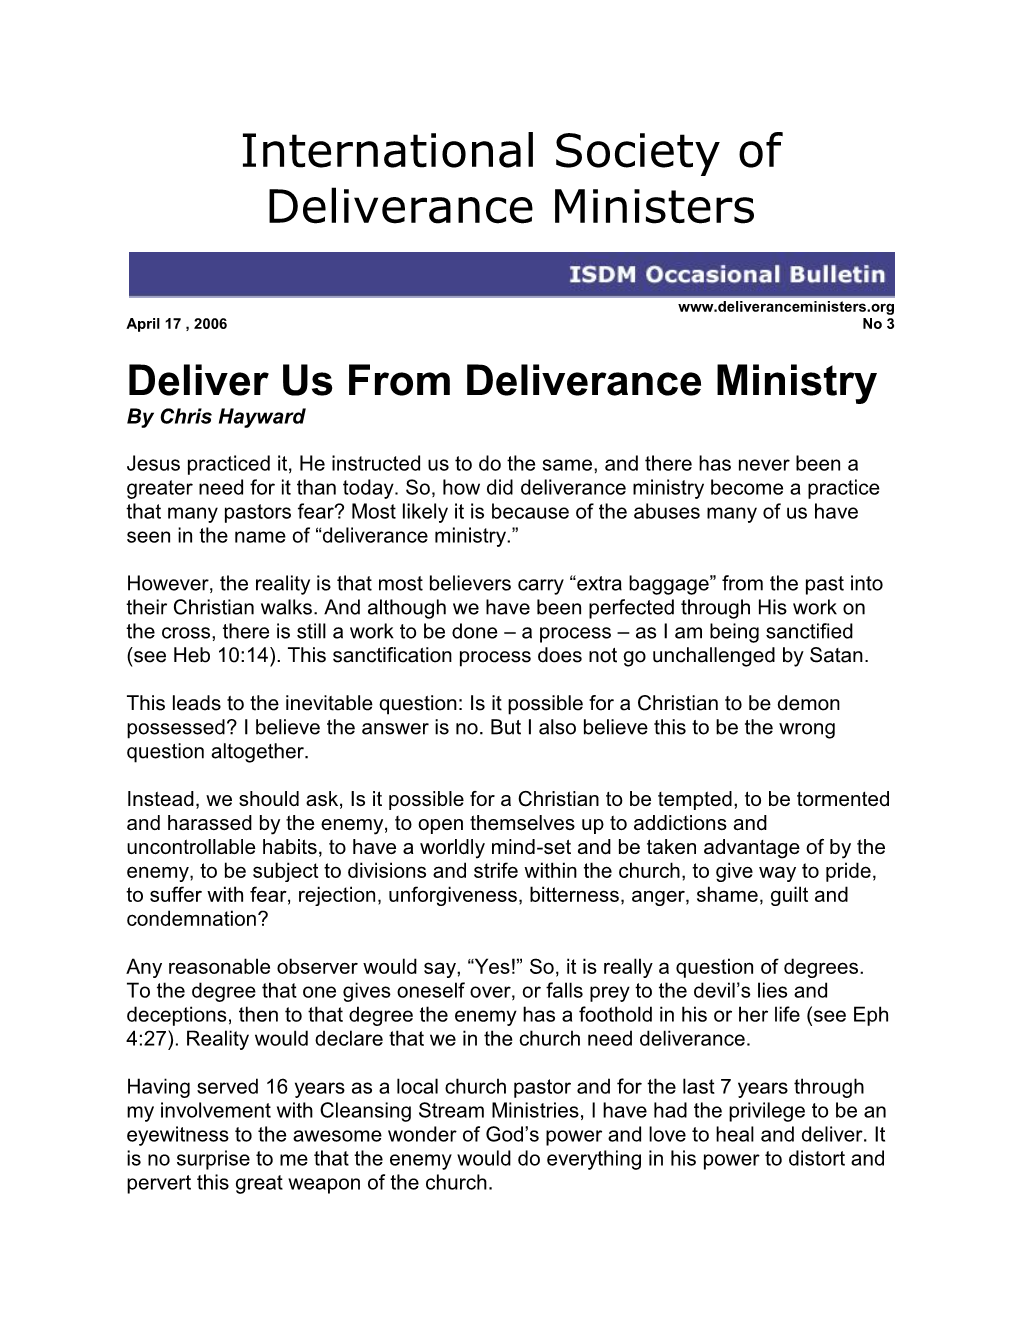 Deliver Us from Deliverance Ministry by Chris Hayward